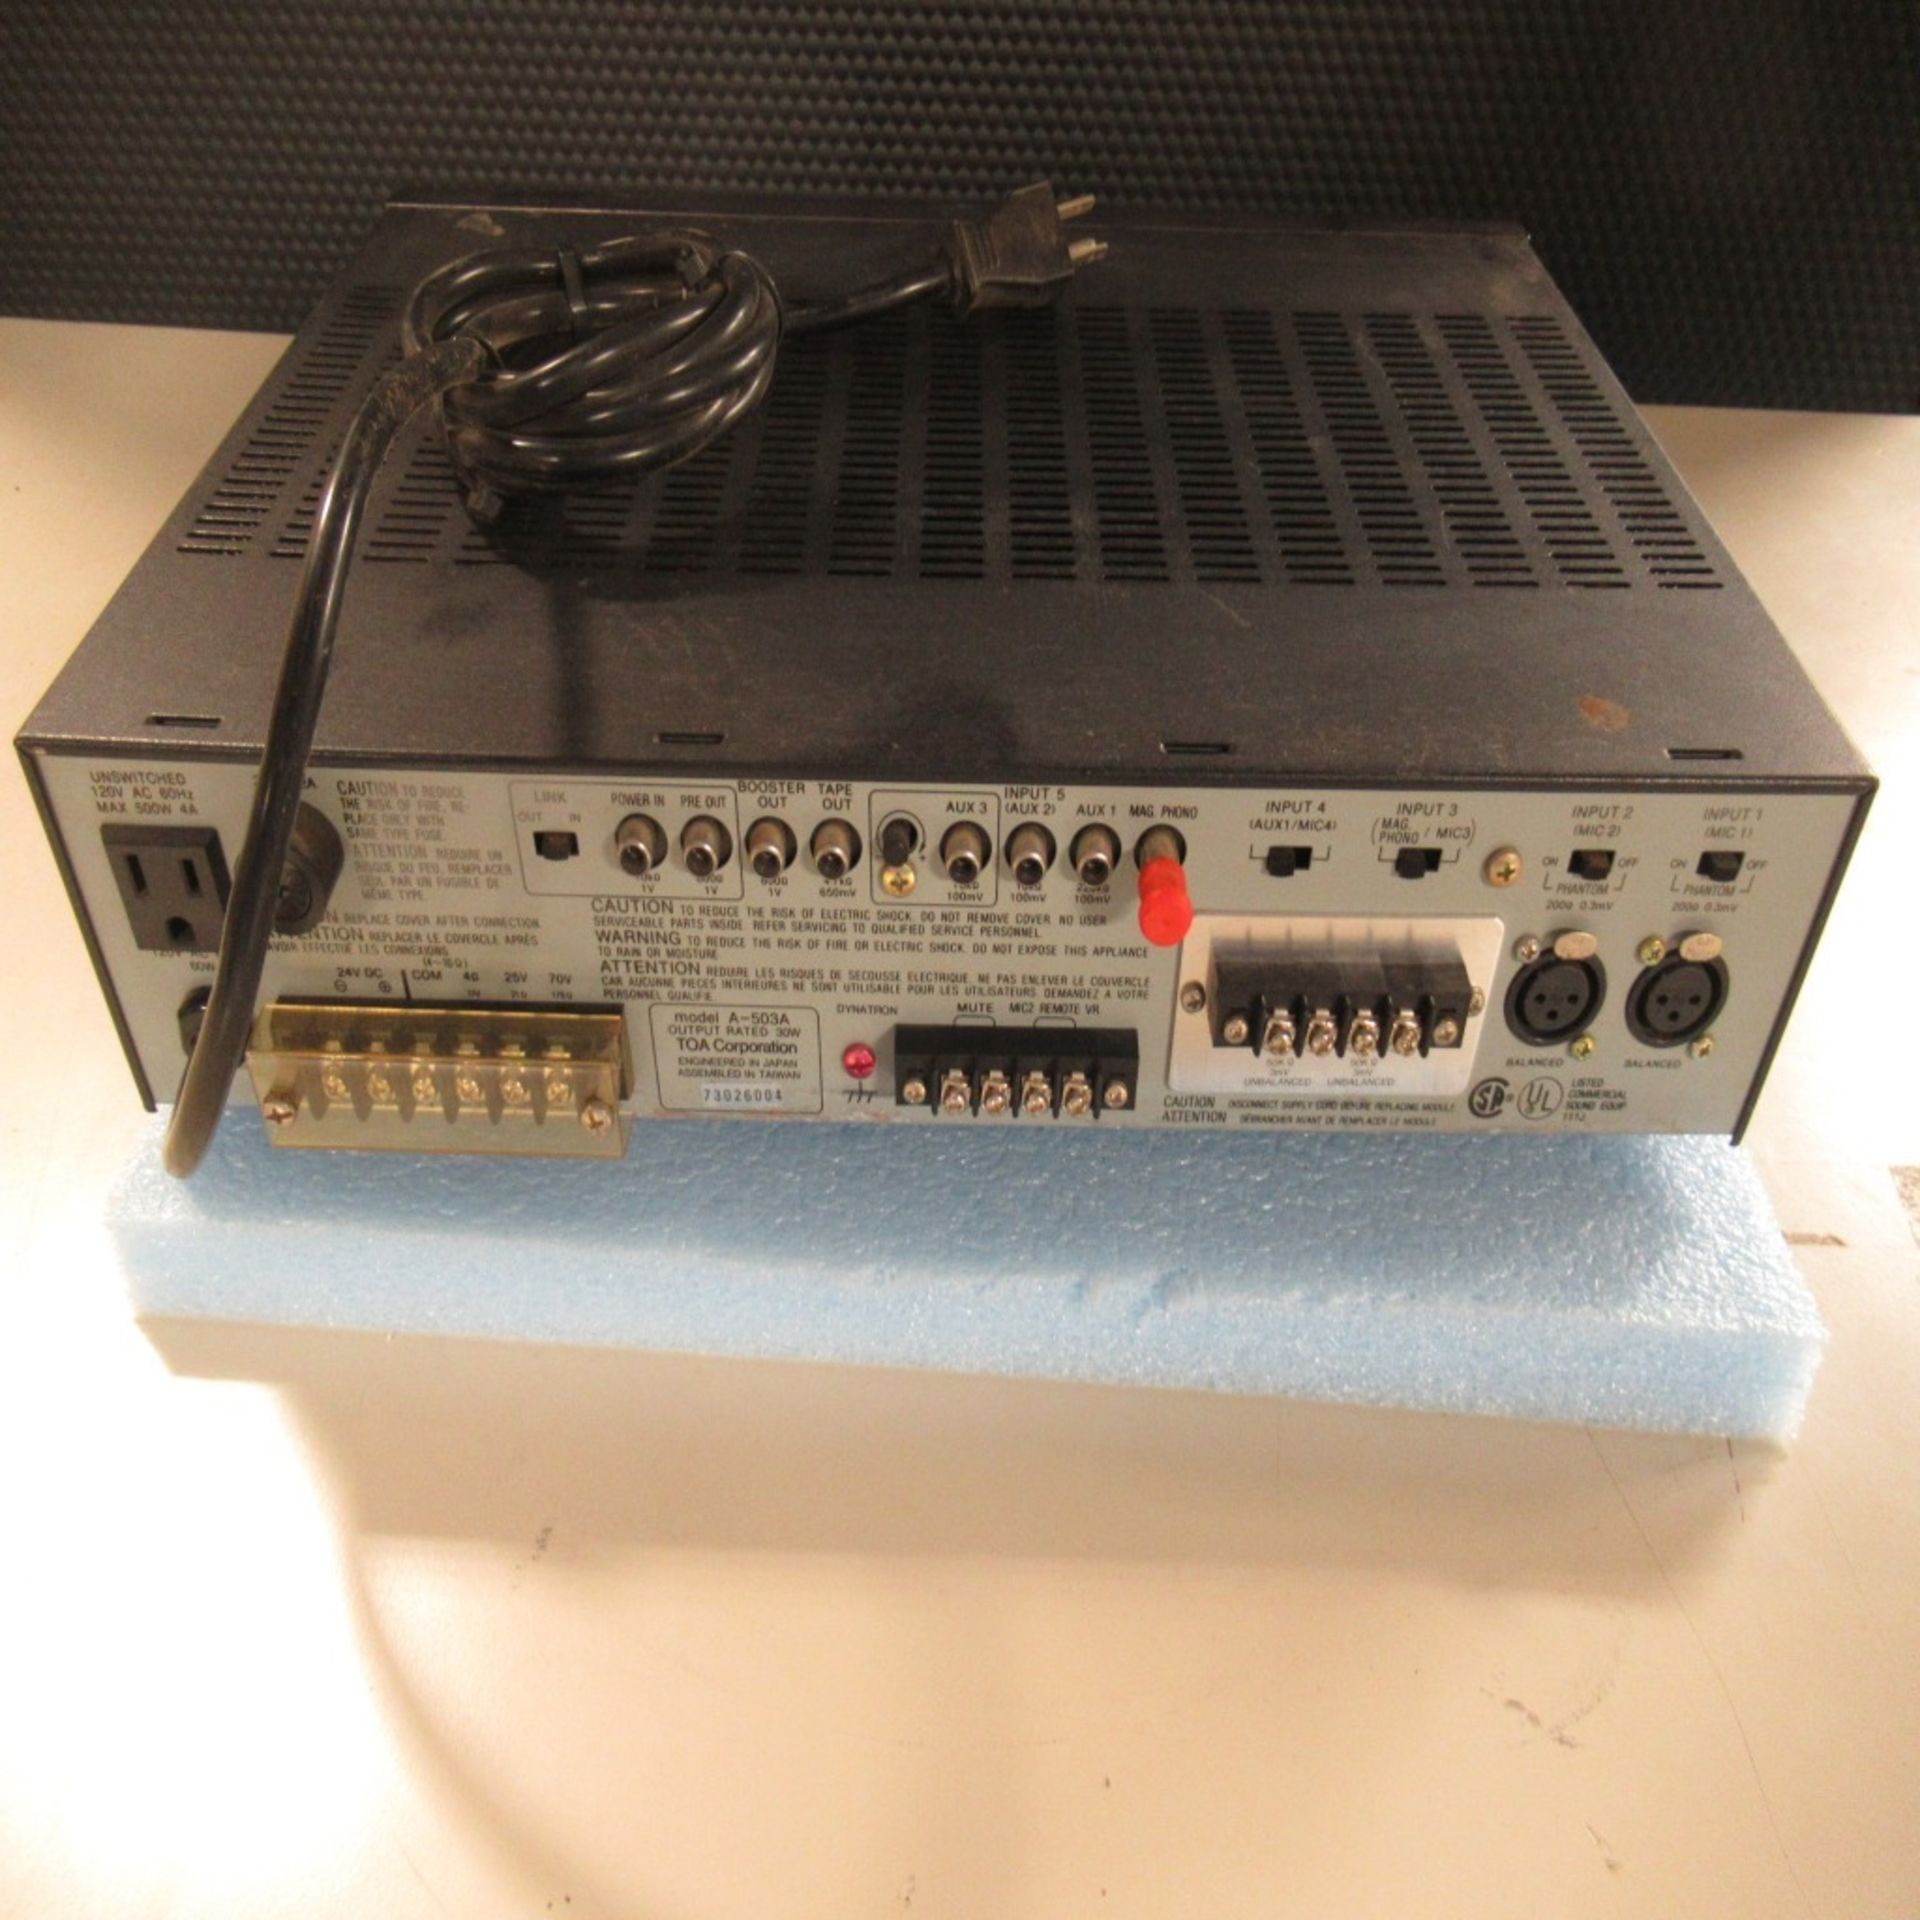 PHOTON SNAP SHOT MODEL 6000 *POWERS ON* NO SCREEN DISPLAY; FARNELL AP20-80 REGULATED POWER SUPPLY * - Image 136 of 222